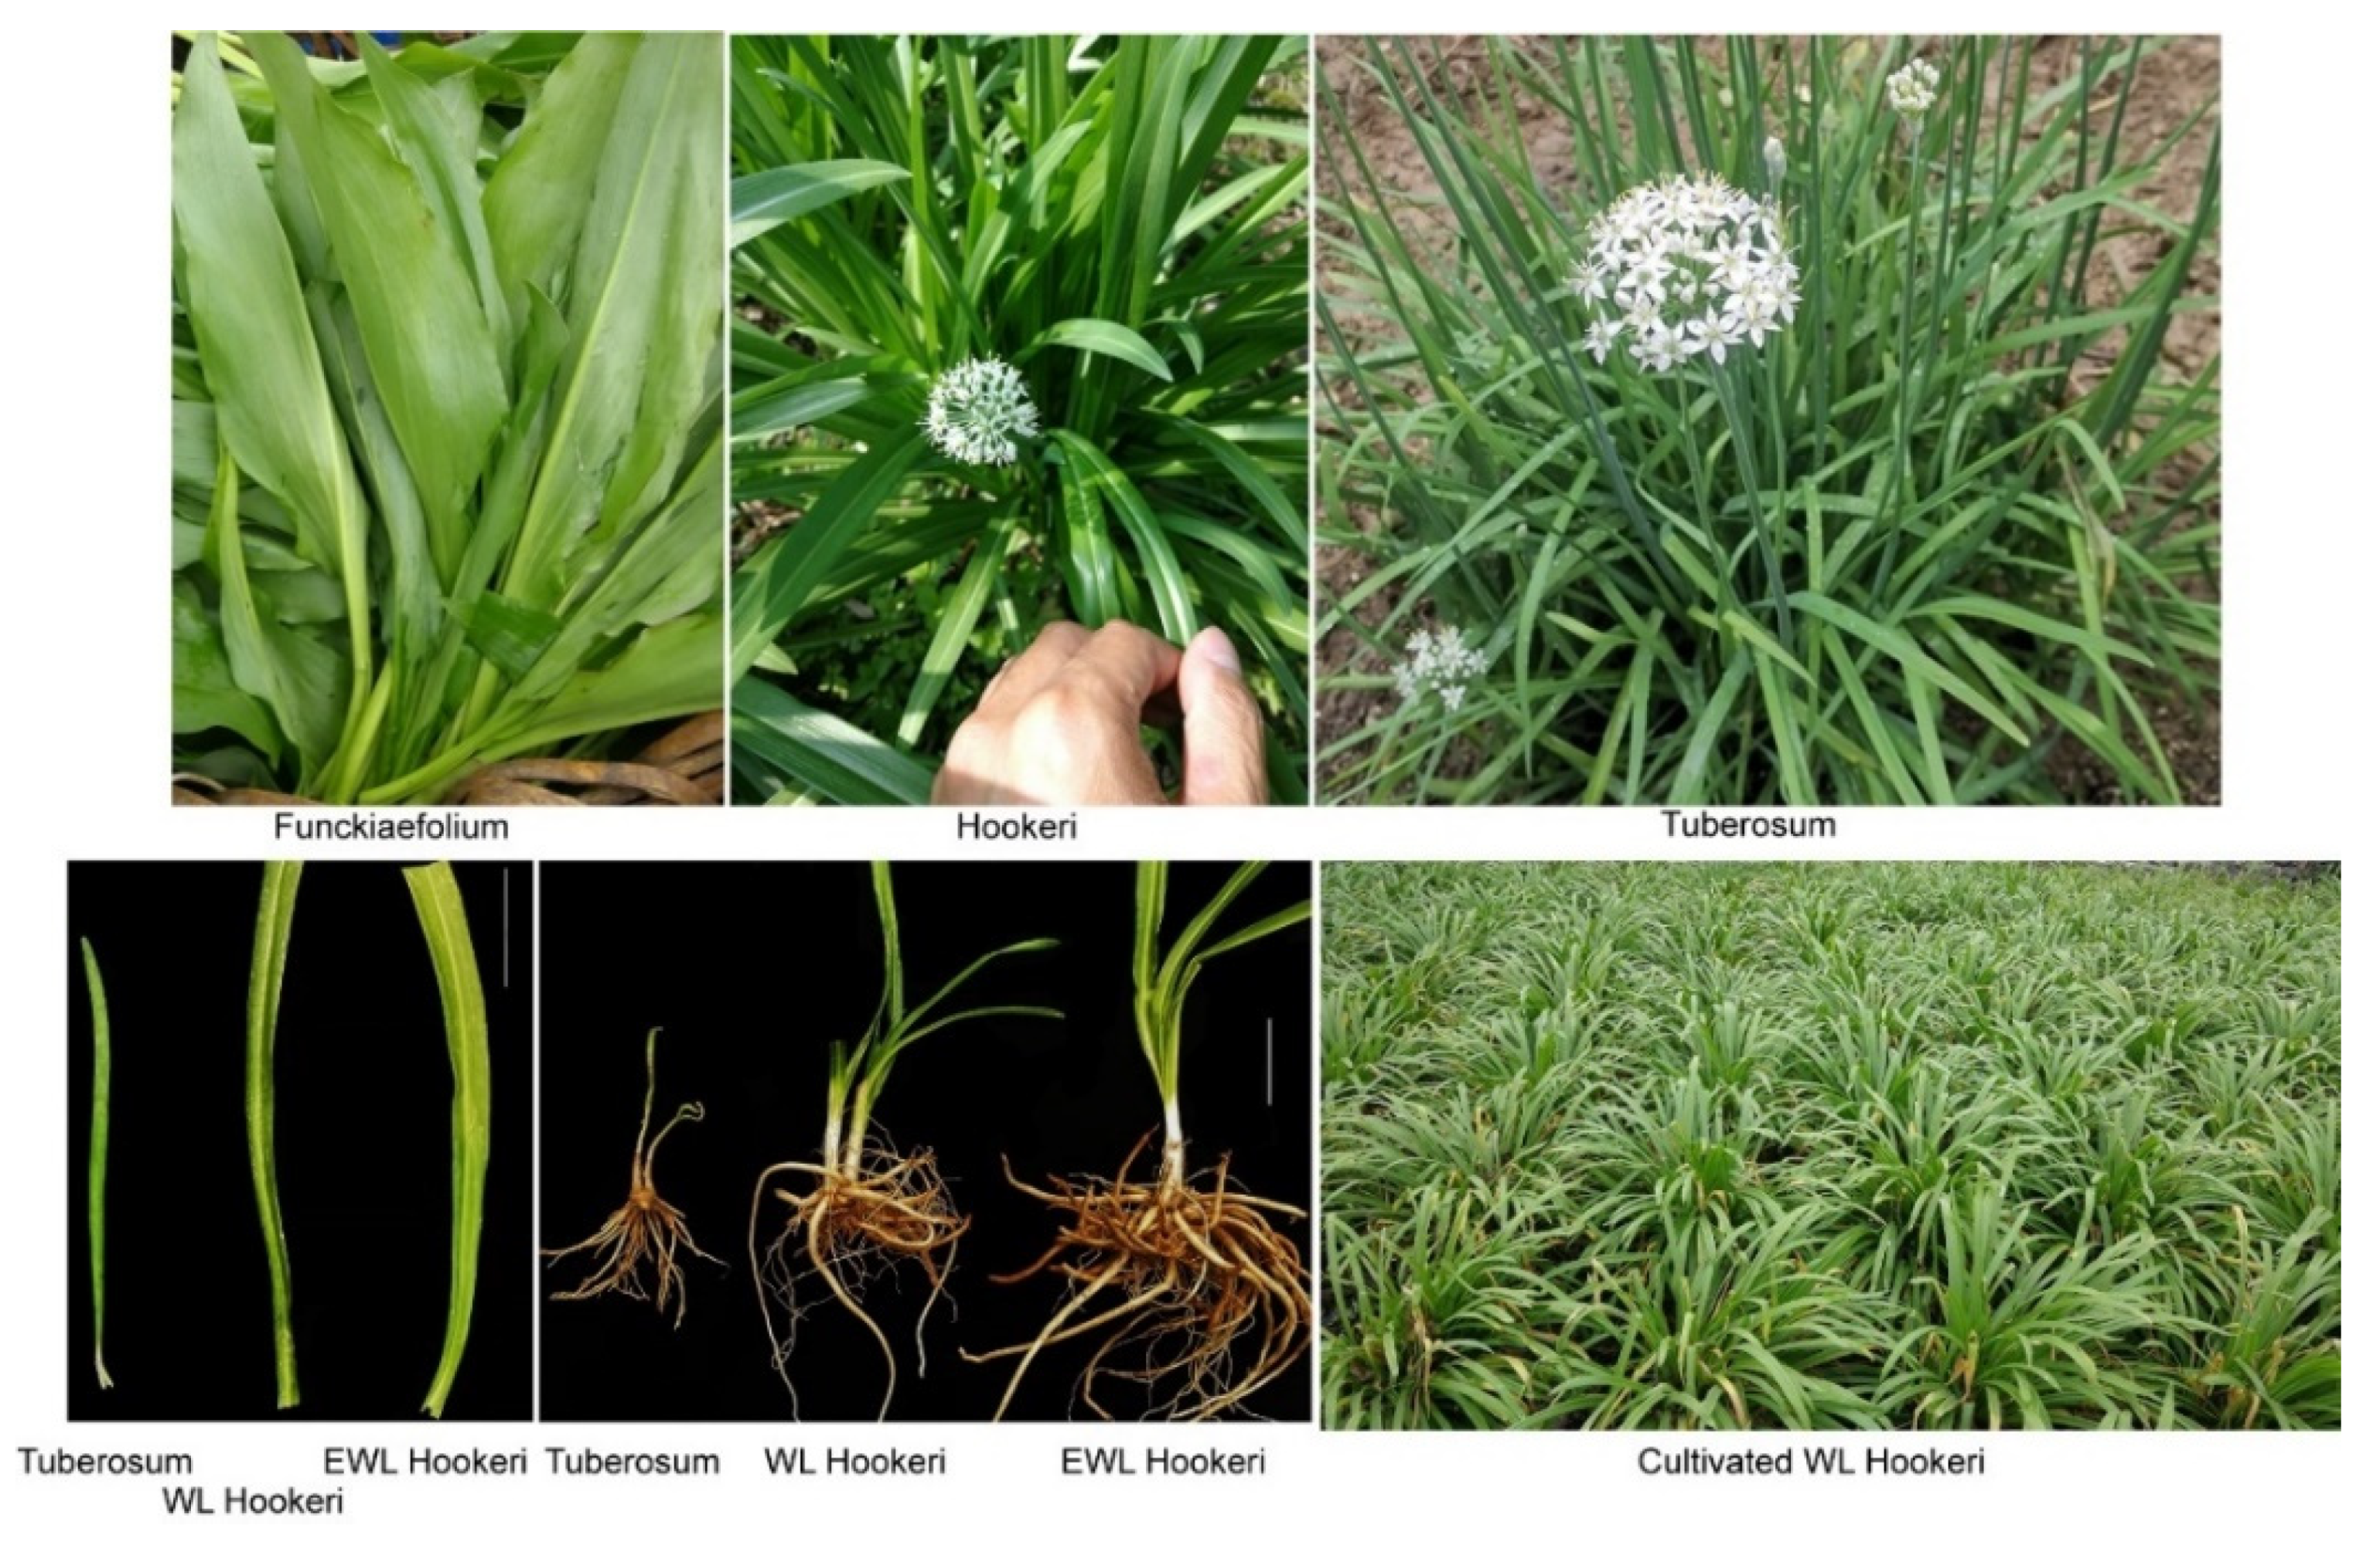 IJMS | Free Full-Text | Biosynthesis and Metabolism of Garlic Odor  Compounds in Cultivated Chinese Chives (Allium tuberosum) and Wild Chinese  Chives (Allium hookeri)